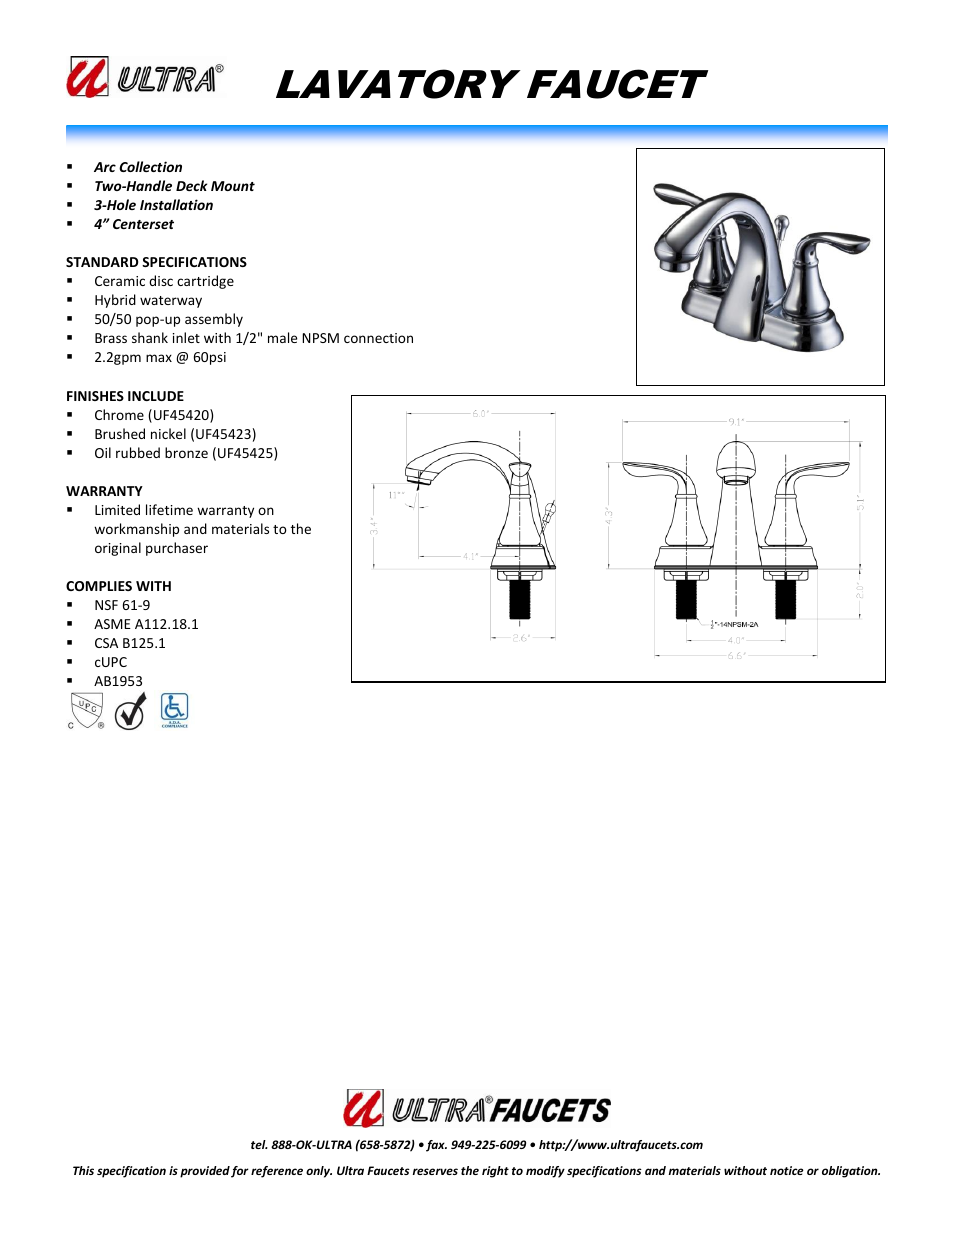 "ARC COLLECTIONTWO-HANDLE LAVATORY FAUCET"